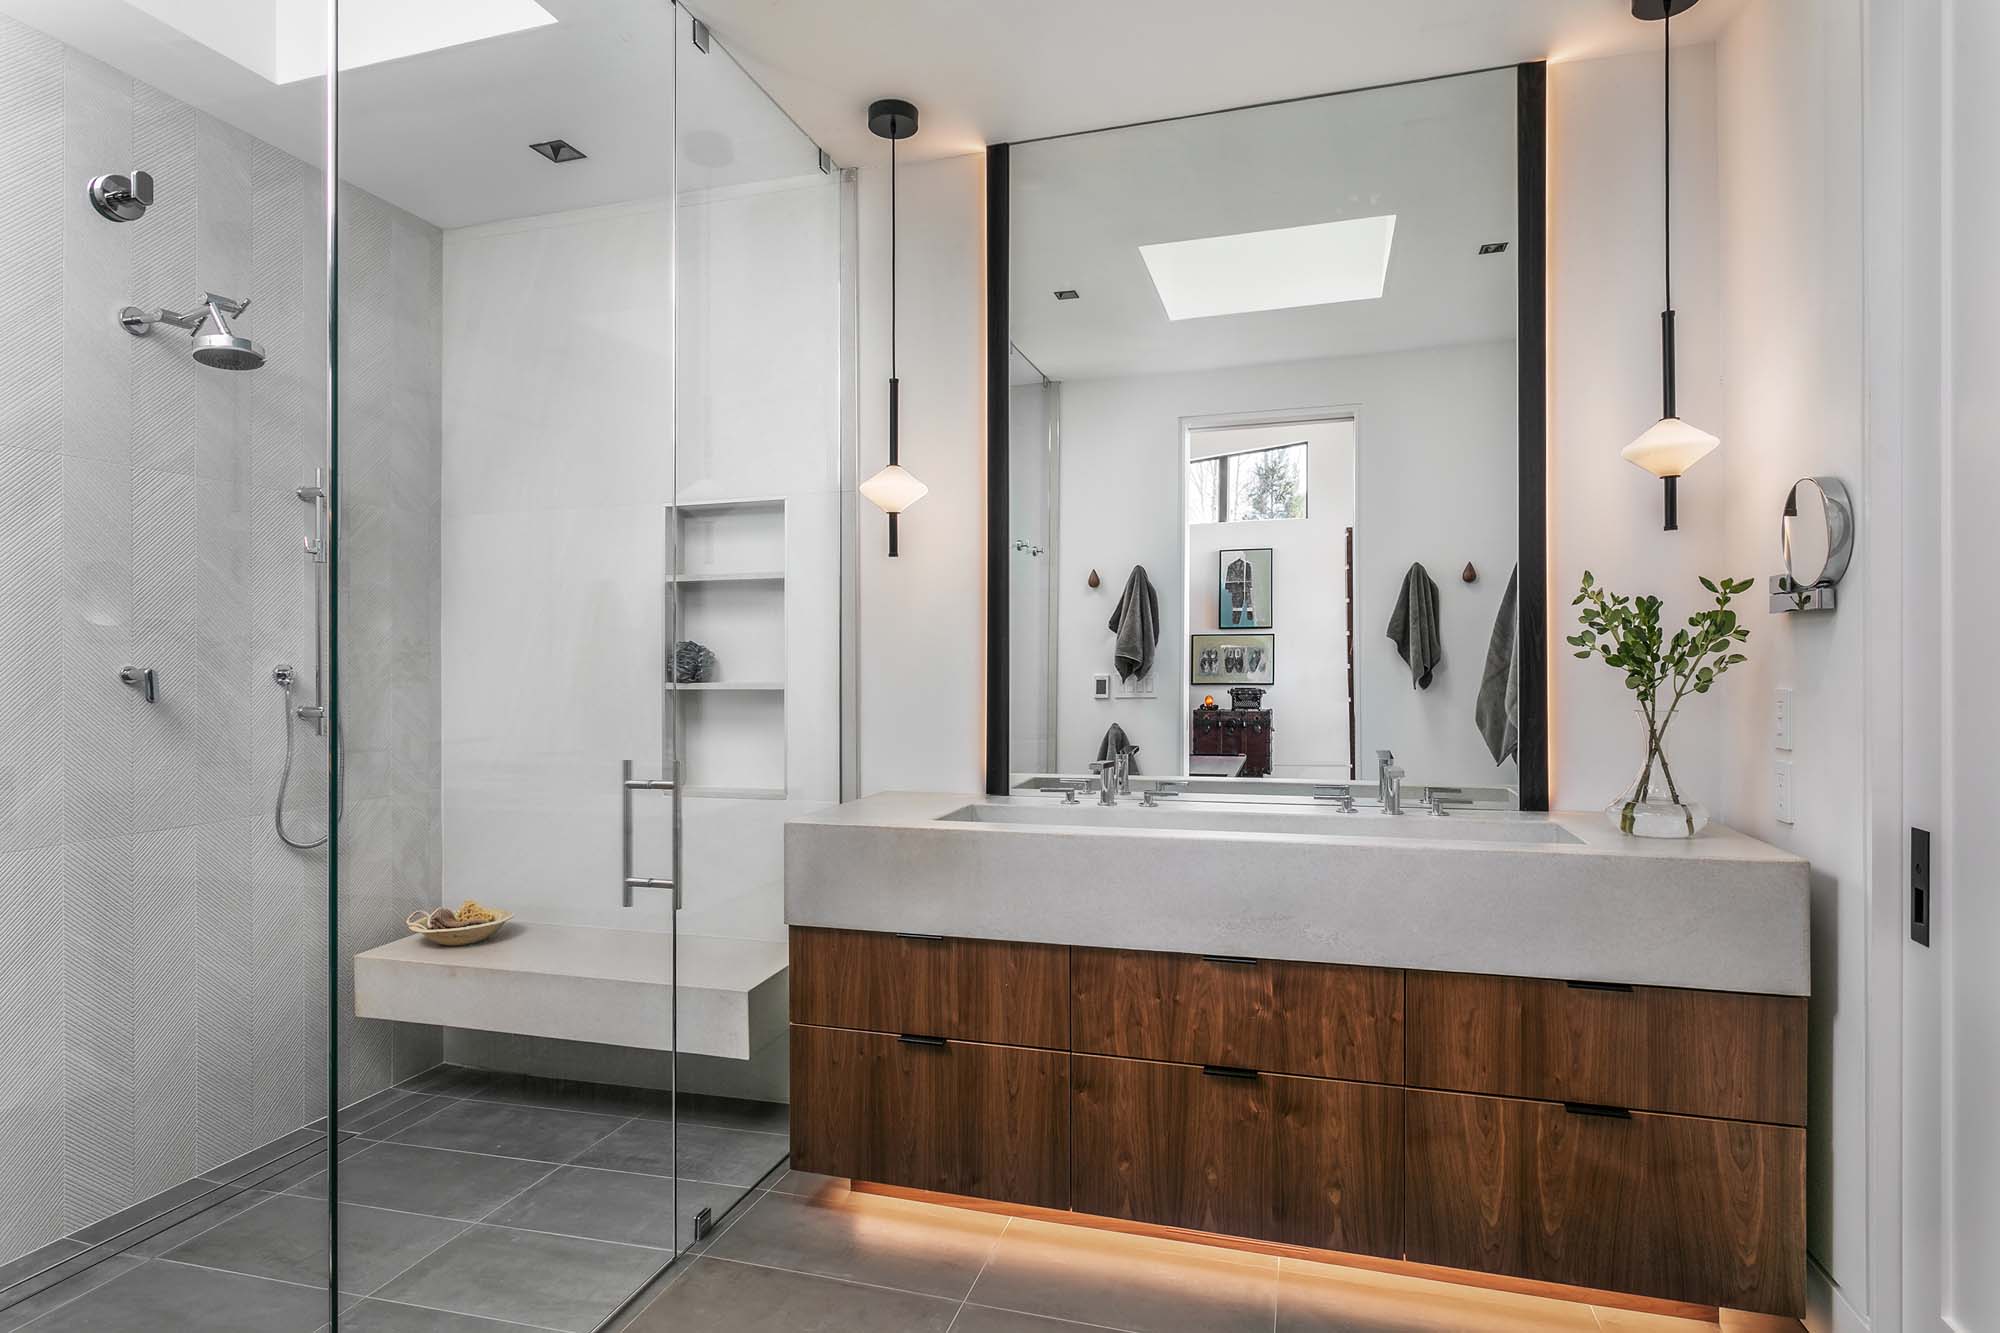 A modern bathroom with concrete, walnut, and tile finishes. 